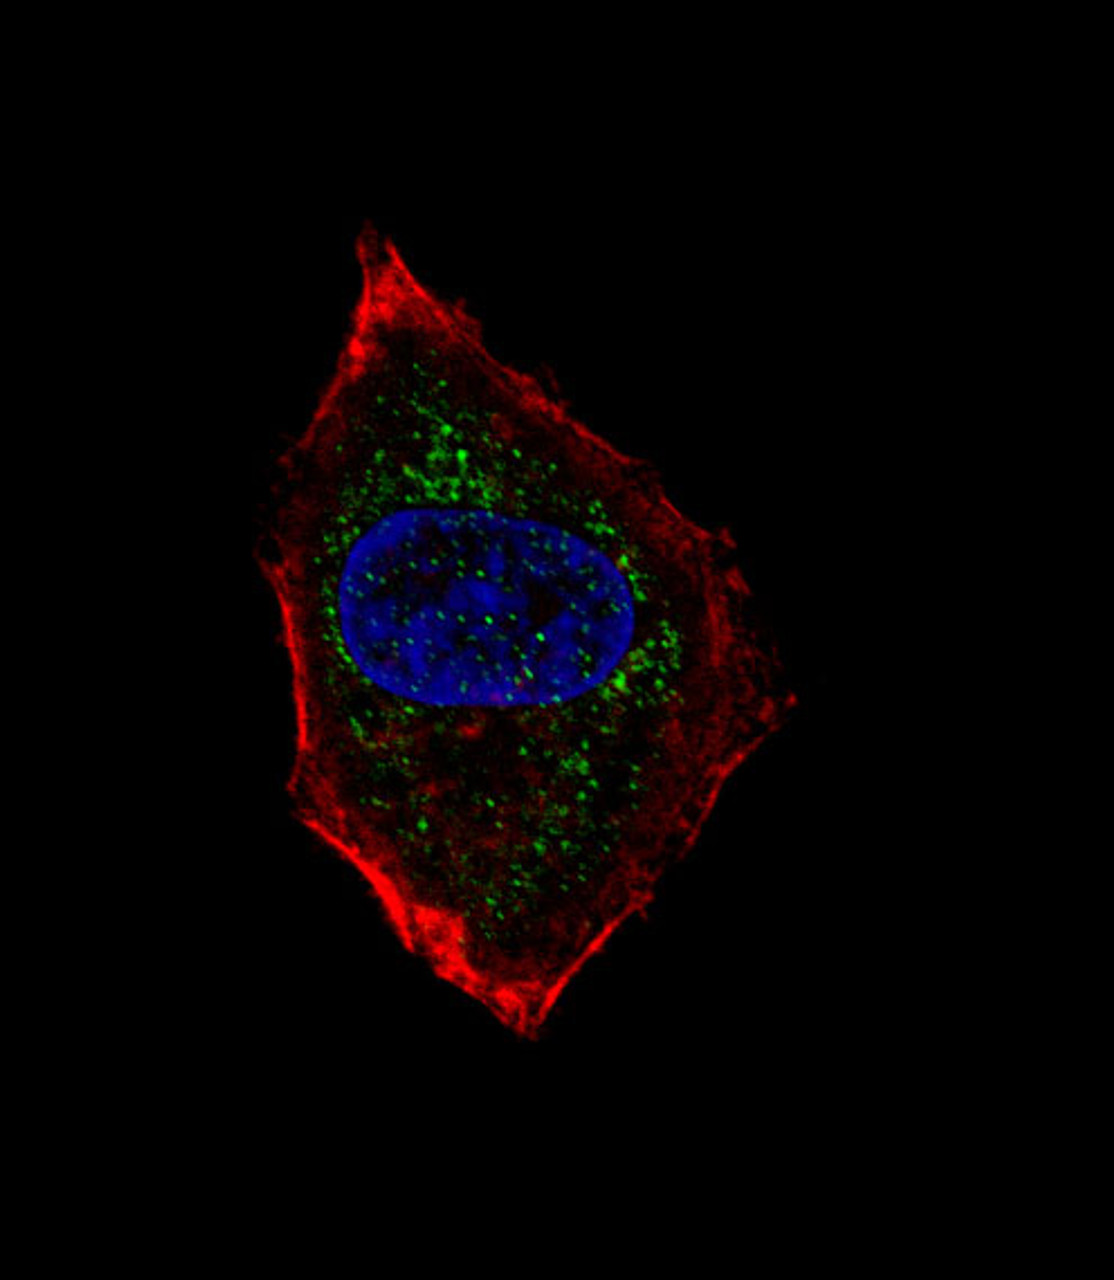 Fluorescent confocal image of HepG2 cell stained with hNeuroD1-Q30. HepG2 cells were fixed with 4% PFA (20 min) , permeabilized with Triton X-100 (0.1%, 10 min) , then incubated with hNeuroD1-Q30 primary antibody (1:25) . For secondary antibody, Alexa Fluor 488 conjugated donkey anti-rabbit antibody (green) was used (1:400) .Cytoplasmic actin was counterstained with Alexa Fluor 555 (red) conjugated Phalloidin (7units/ml) . Nuclei were counterstained with DAPI (blue) (10 ug/ml, 10 min) .hNeuroD1-Q30 immunoreactivity is localized to vesicles significantly.